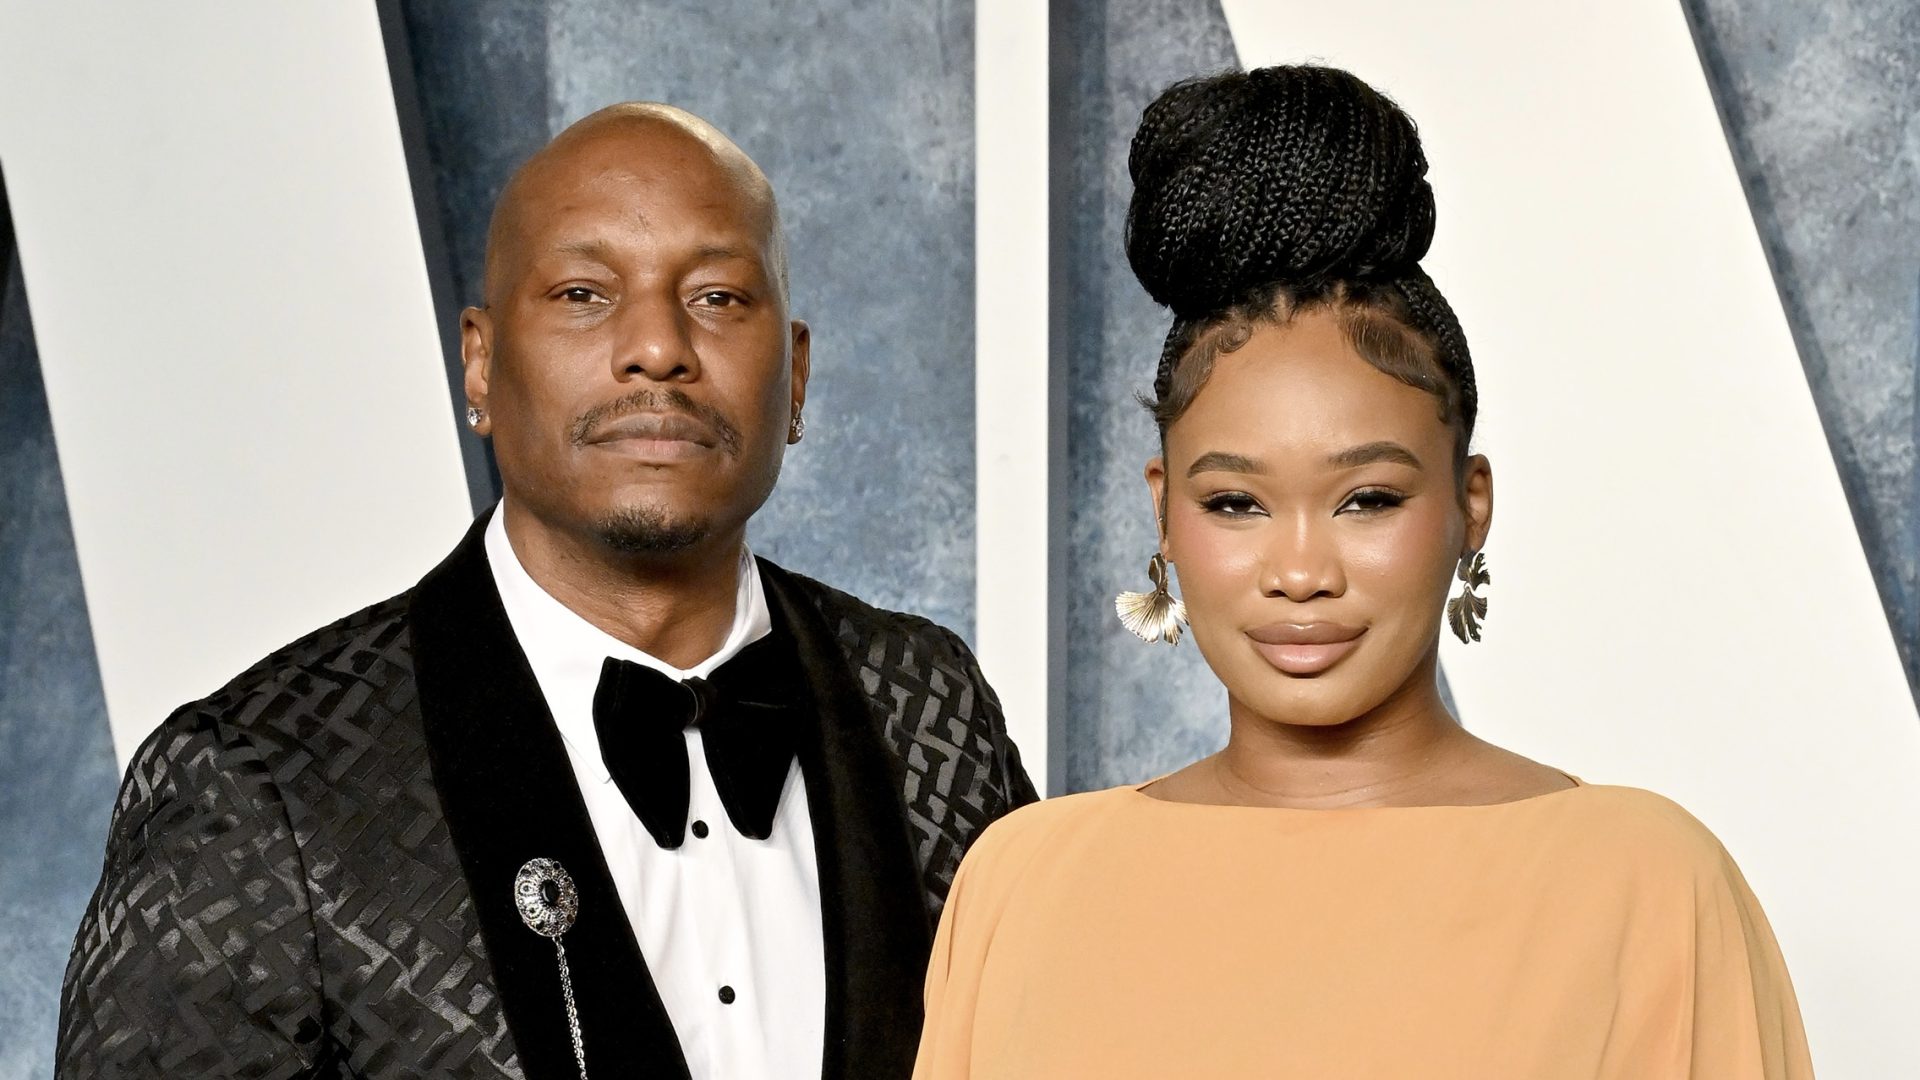 BEVERLY HILLS, CALIFORNIA - MARCH 12: Tyrese Gibson and Zelie Timothy attend the 2023 Vanity Fair Oscar Party hosted by Radhika Jones at Wallis Annenberg Center for the Performing Arts on March 12, 2023 in Beverly Hills, California.